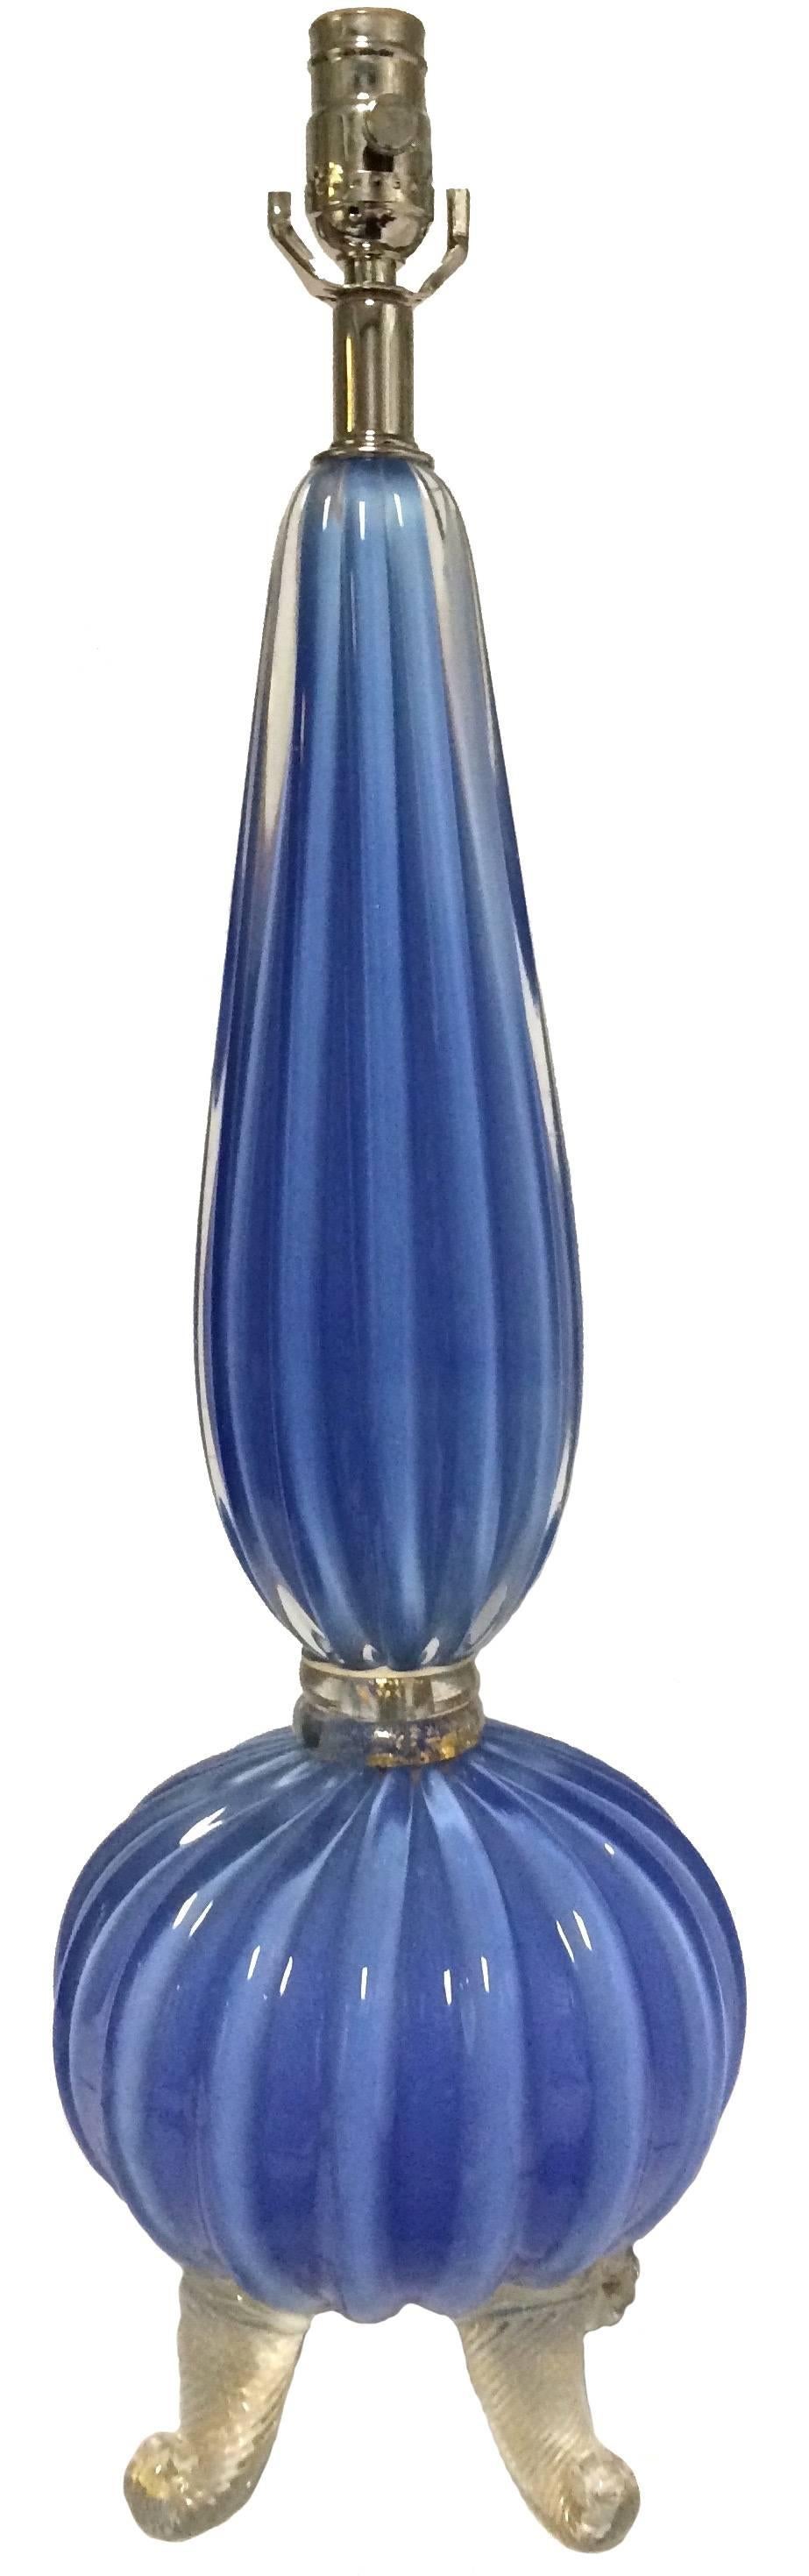 Midcentury Murano single blue glass table lamp attributed to Barovier & Toso. Rare cornflower blue opalescent ribbed glass. Curvy gold flecked dolphin-footed base. Newly rewired, takes one standard bulb.